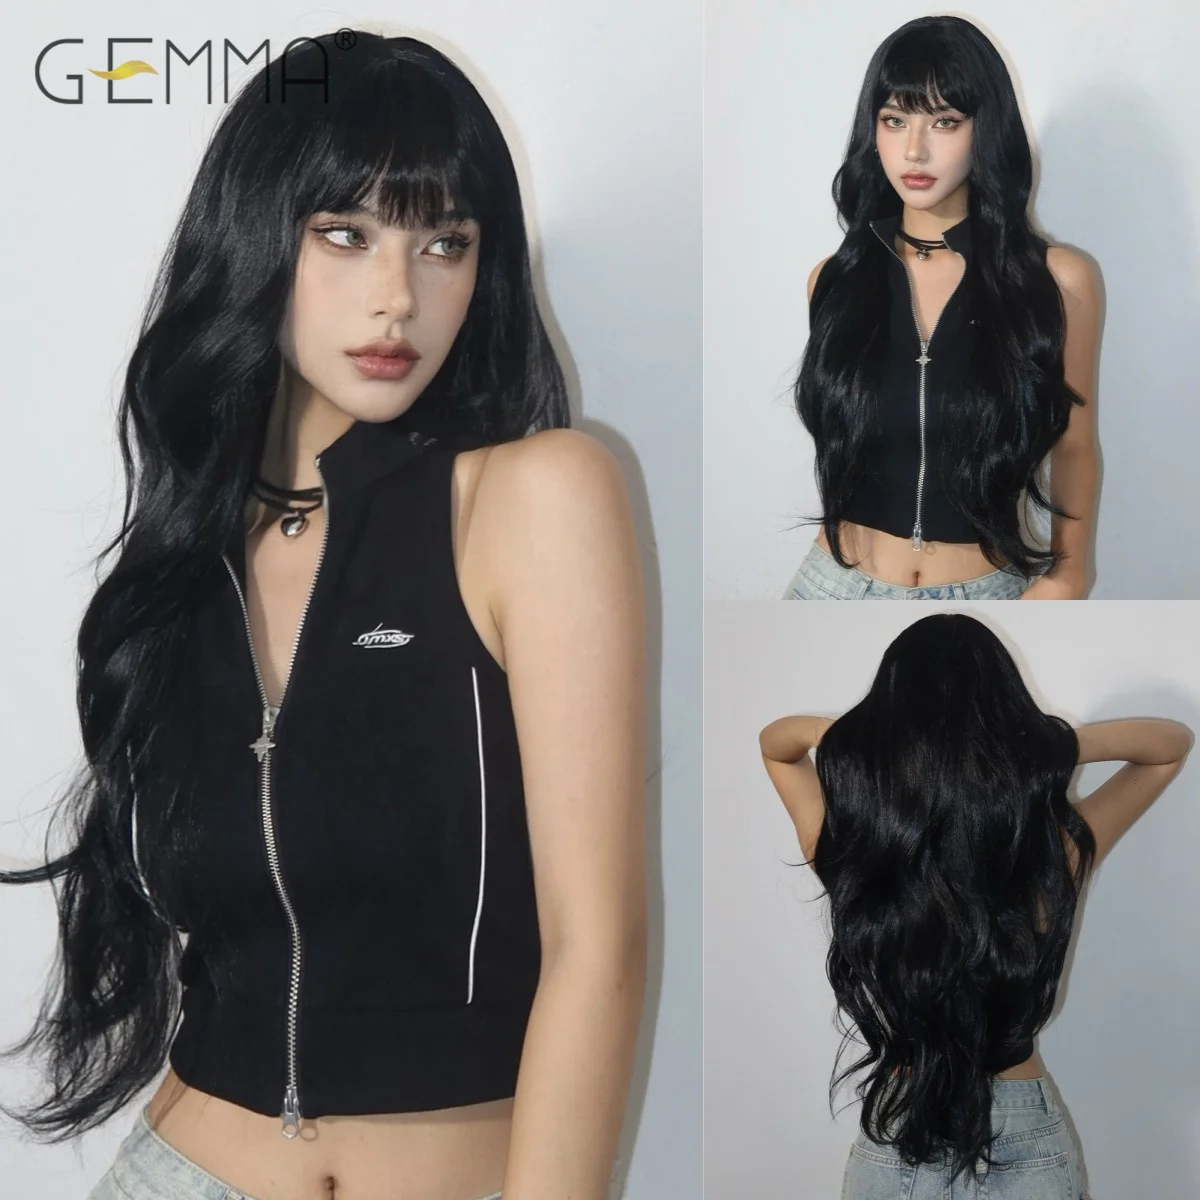 Black Synthetic Long Wavy Wig with Fluffy Bangs Natural Wave Wigs for Women Cosplay Daily Use Fake Hair Heat Resistant Fibre imstyle red wig long synthetic lace front wig natural wavy cosplay wigs for women heat resistant fiber white brown lace wigs